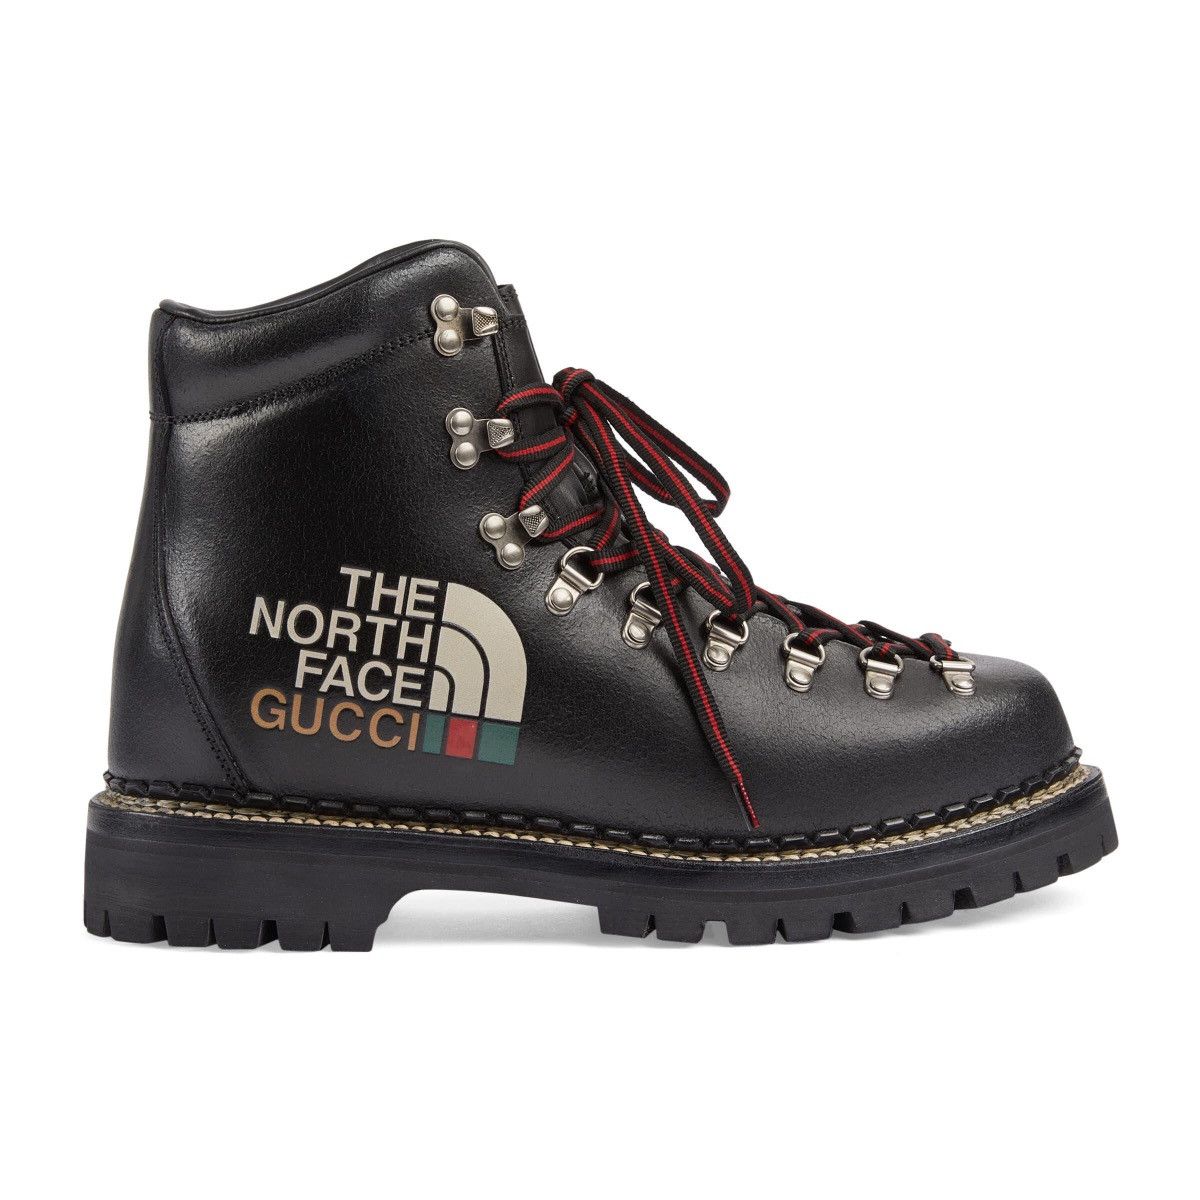 The North Face x Gucci - Authenticated Boots - Leather Red Plain for Men, Never Worn